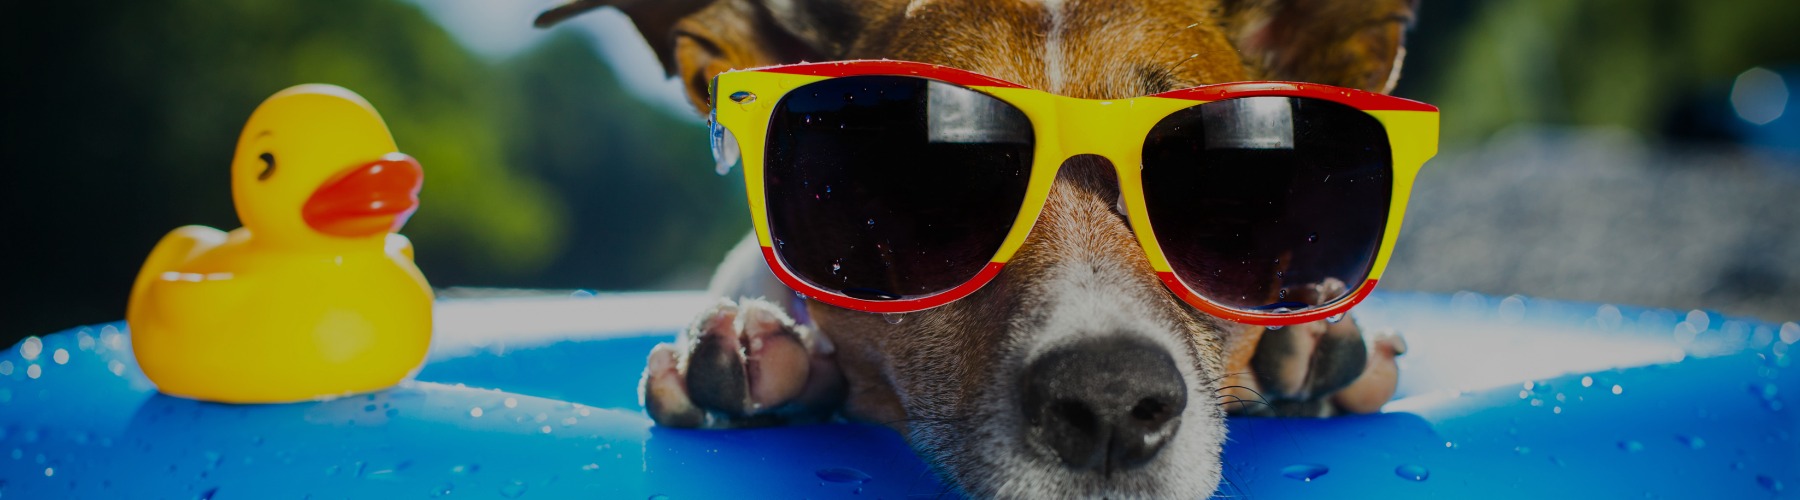 7 Summer Safety Tips for Dog Groomers